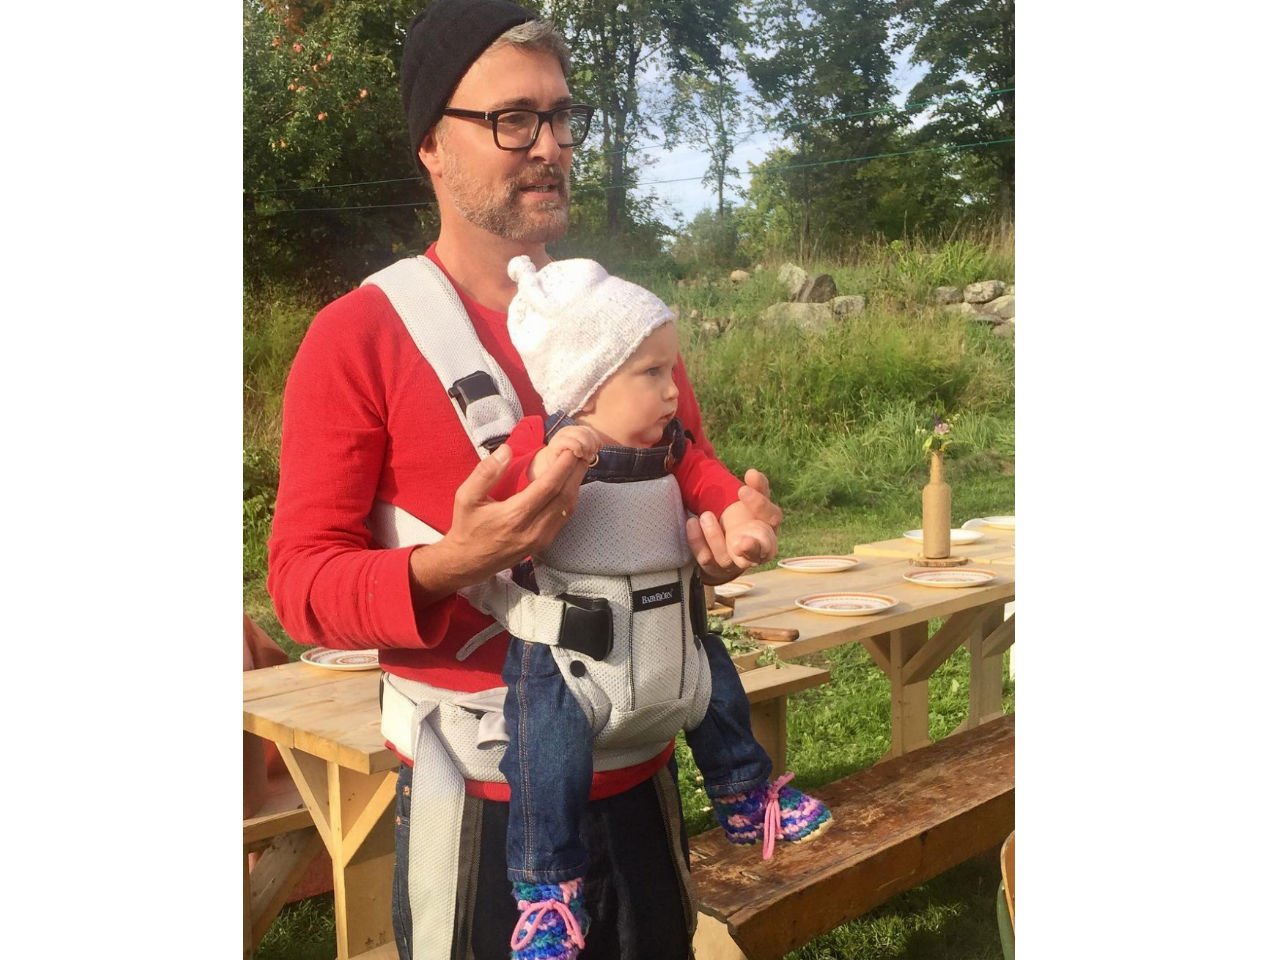 A father carries baby in a carrier at an outdoor picnic